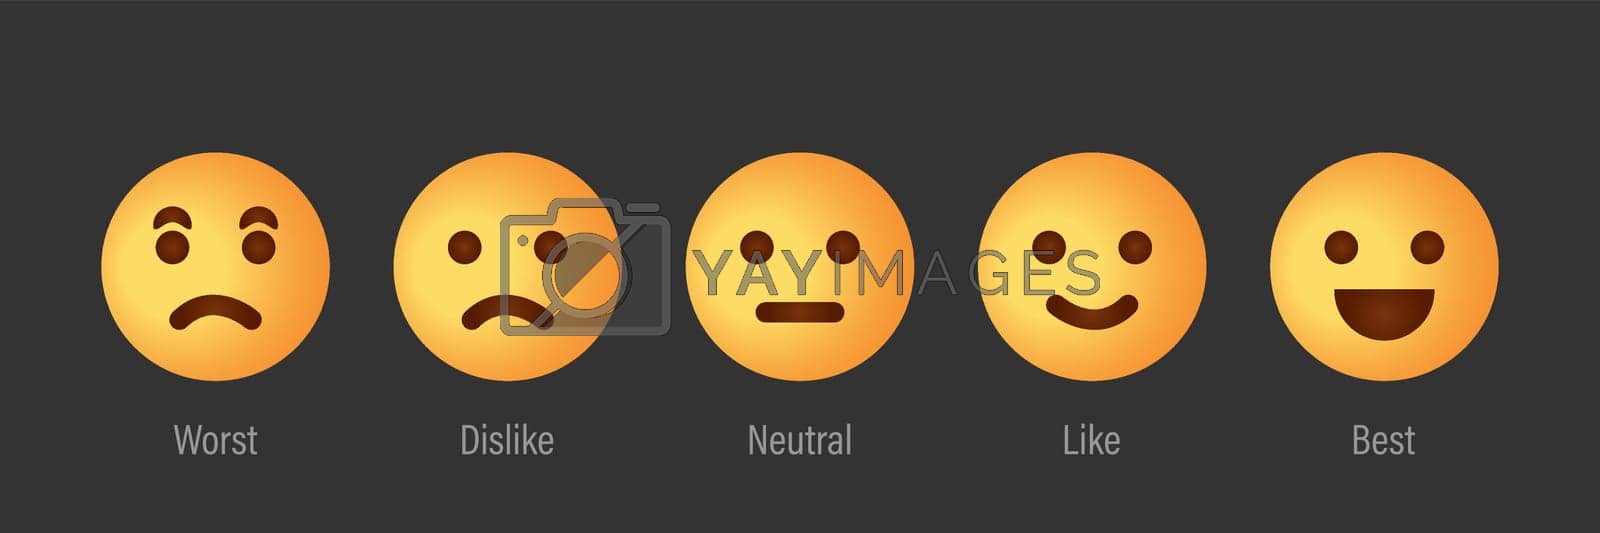 Royalty free image of Feedback Scale Service with Emotion Icons. User Experience Rate with Feedback Scale. Yellow Emoji for Customer Feedback. Worst, Dislike, Neutral, Like, Best Emotion Icons. Vector illustration by Toxa2x2